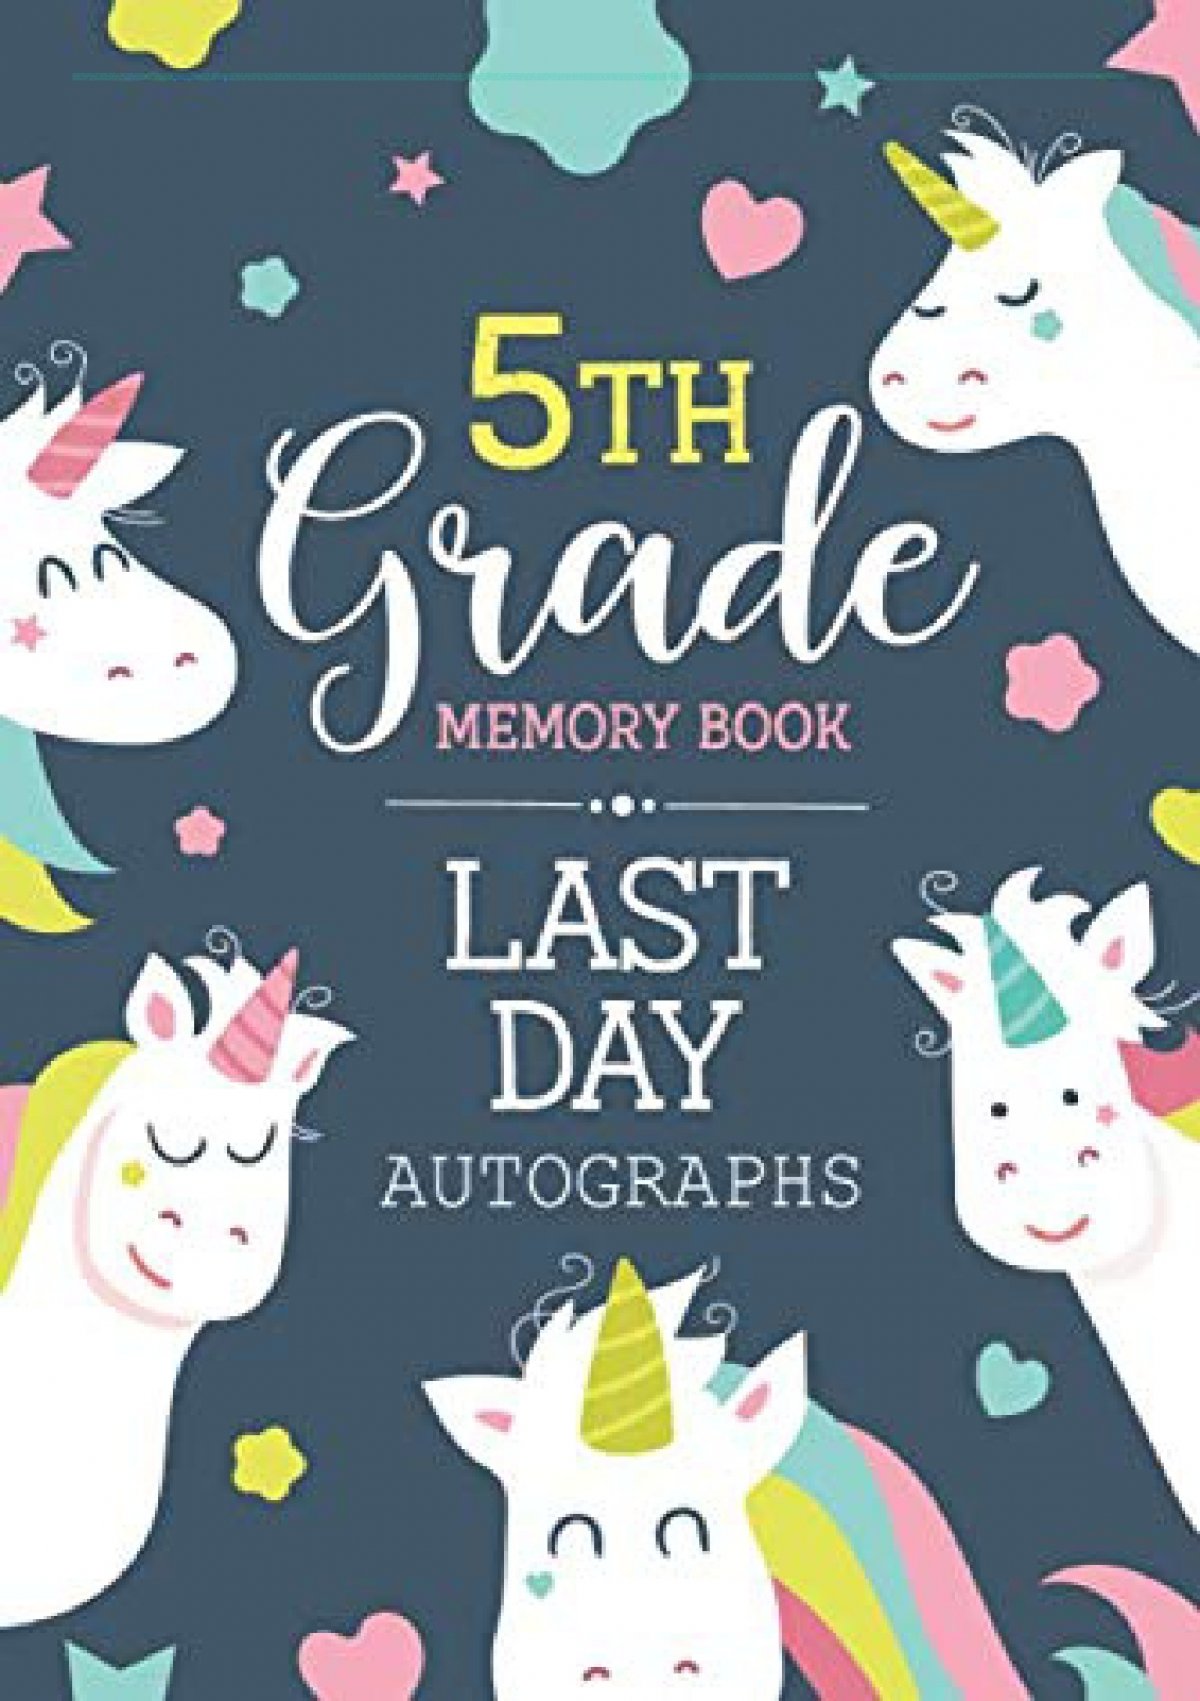 download-5th-grade-memory-book-last-day-autographs-keepsake-for